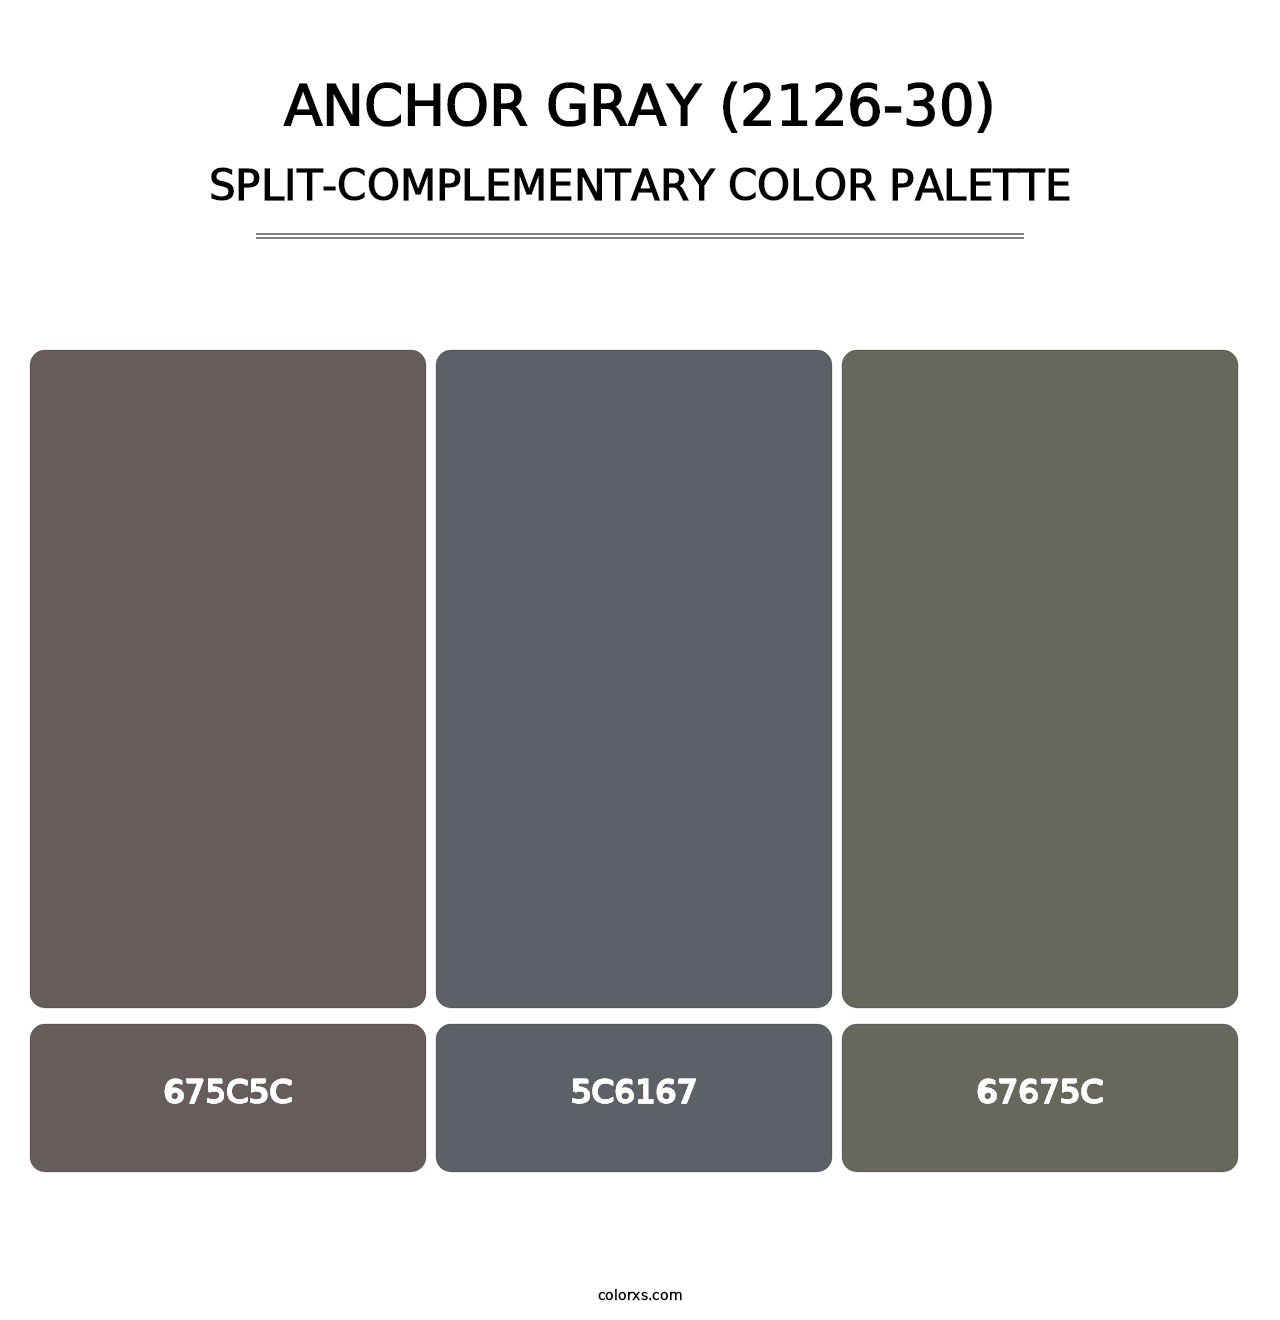 Anchor Gray (2126-30) - Split-Complementary Color Palette